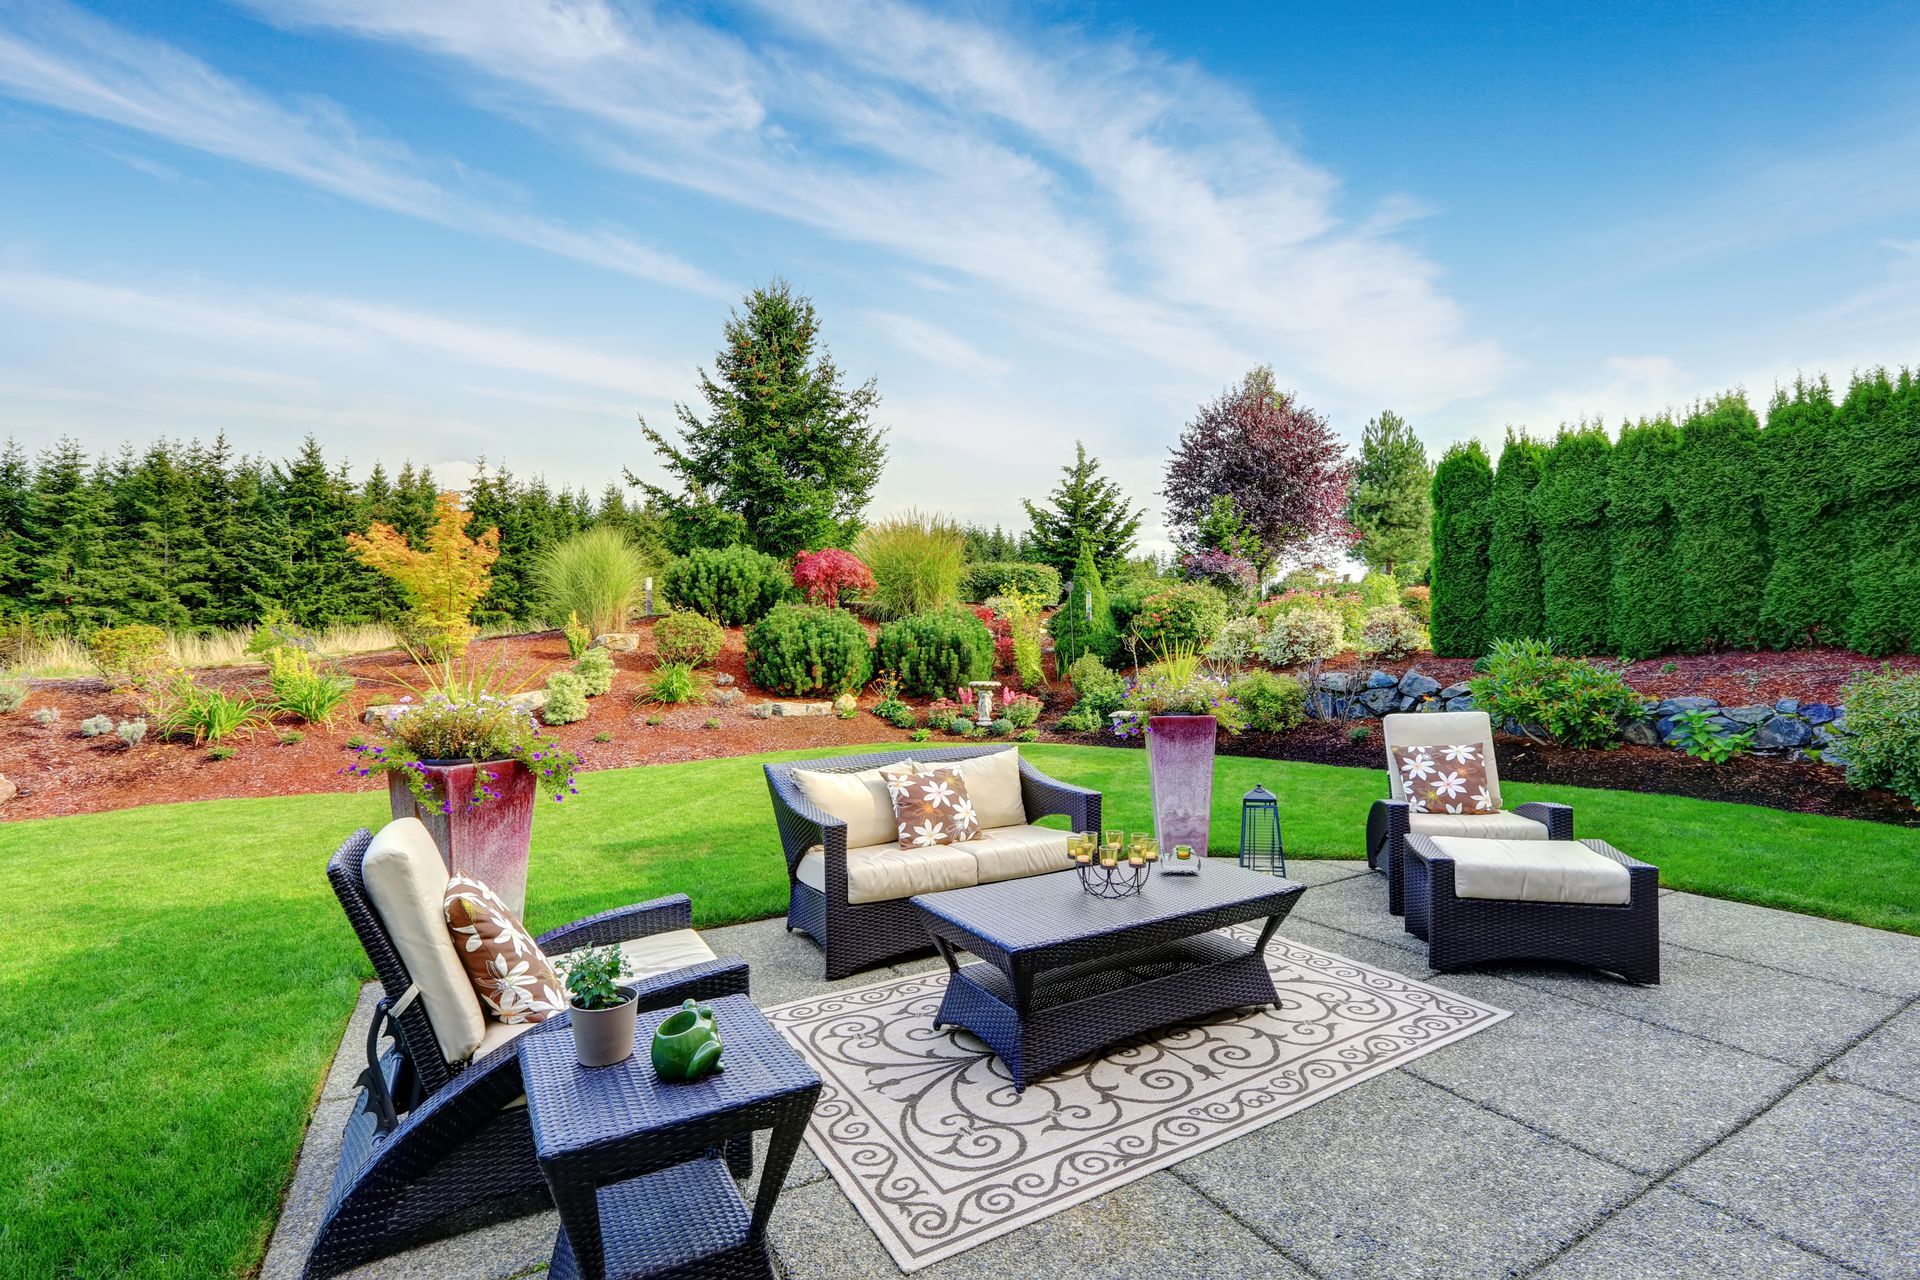 Professional Landscape Design: The Key To Increasing Your Property Value